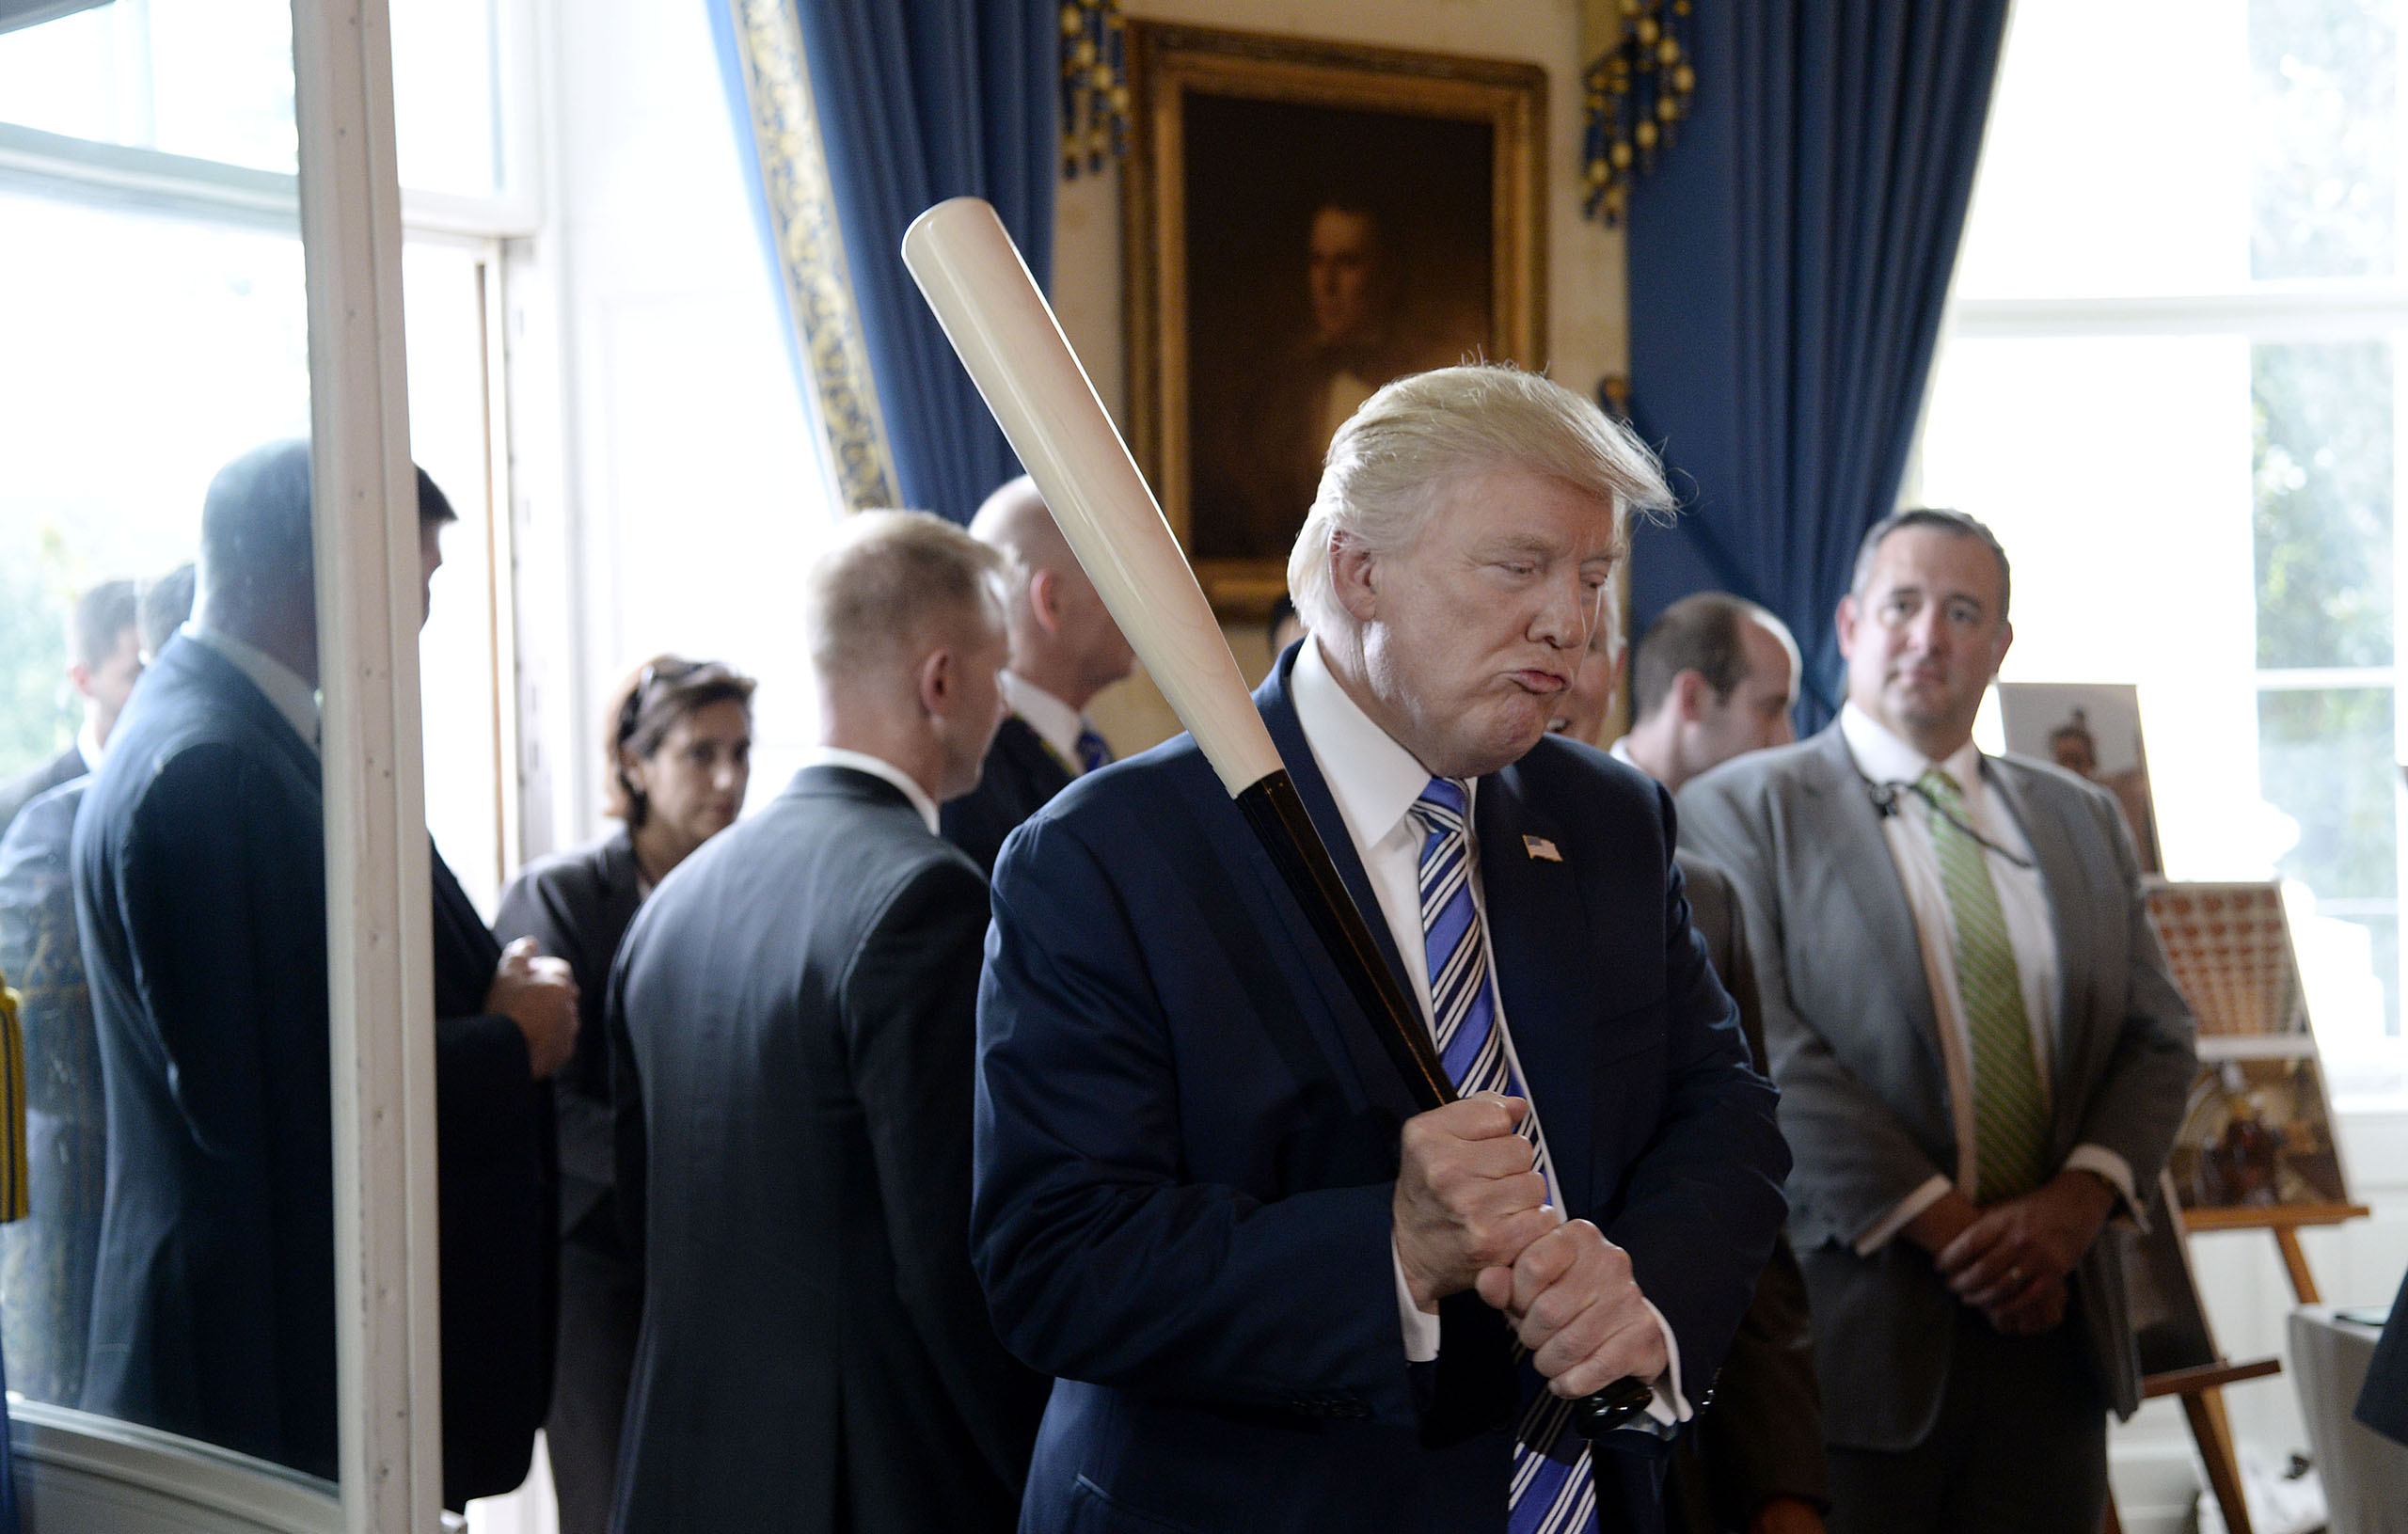 US President Donald Trump examines US-made products from all 50 states, including a Marucci baseball bat, in the Blue Room of the White House during a  Made in America  product showcase event in Washington, DC, on July 17, 2017.